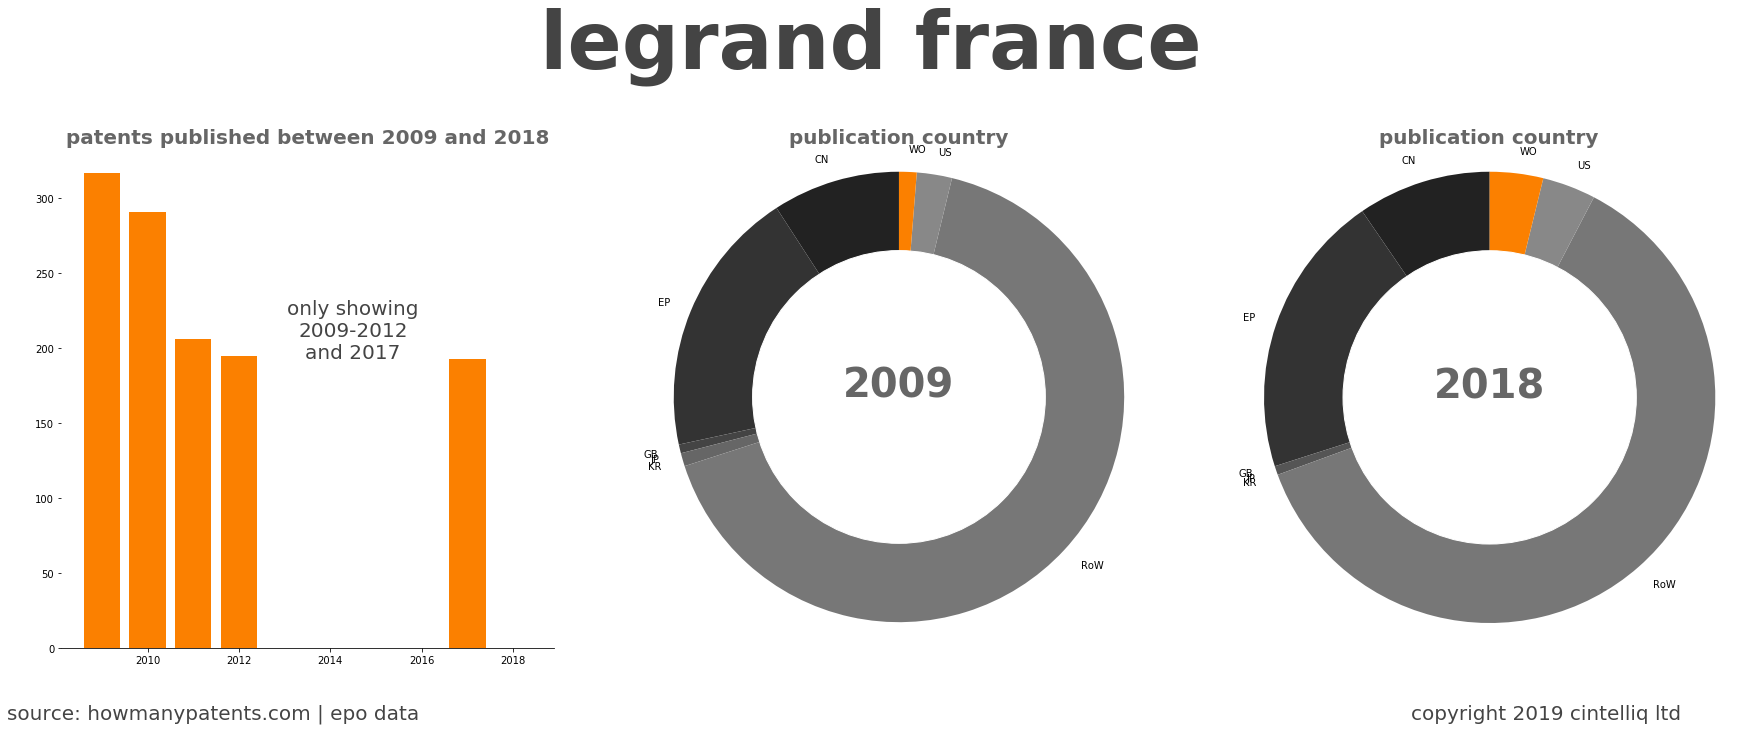 summary of patents for Legrand France